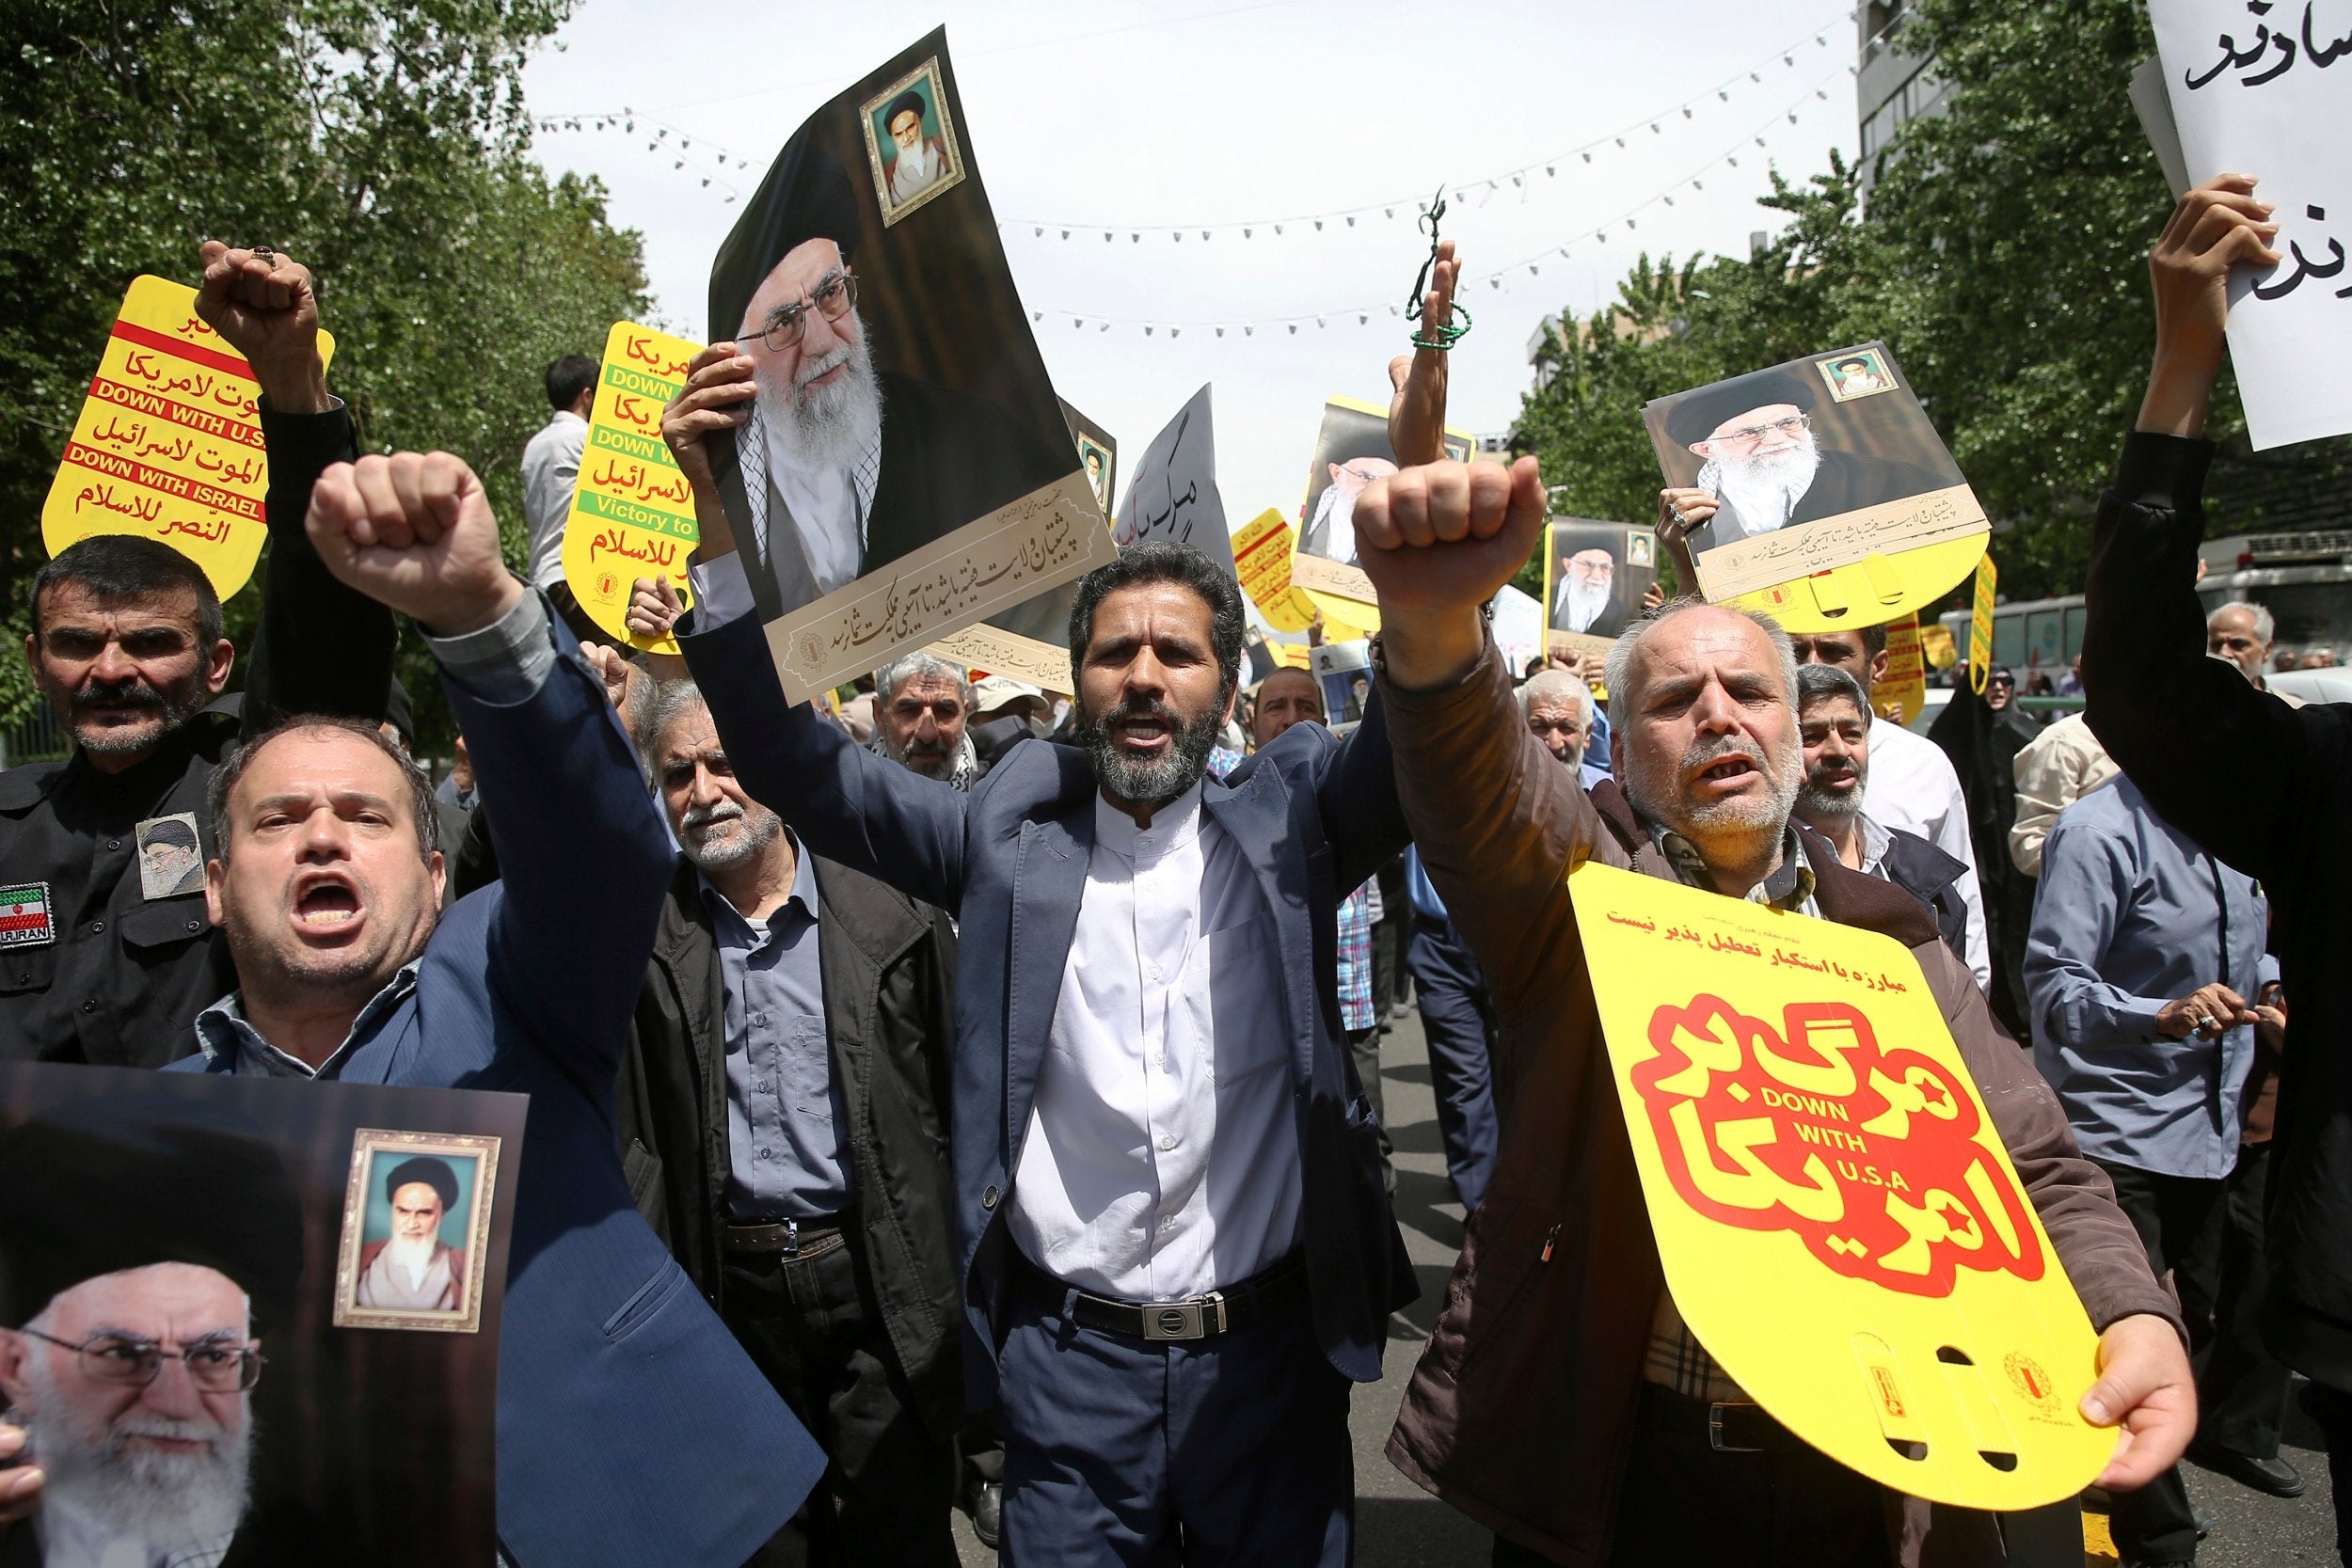 Worshippers chant slogans against the US and Israel during a rally in Tehran